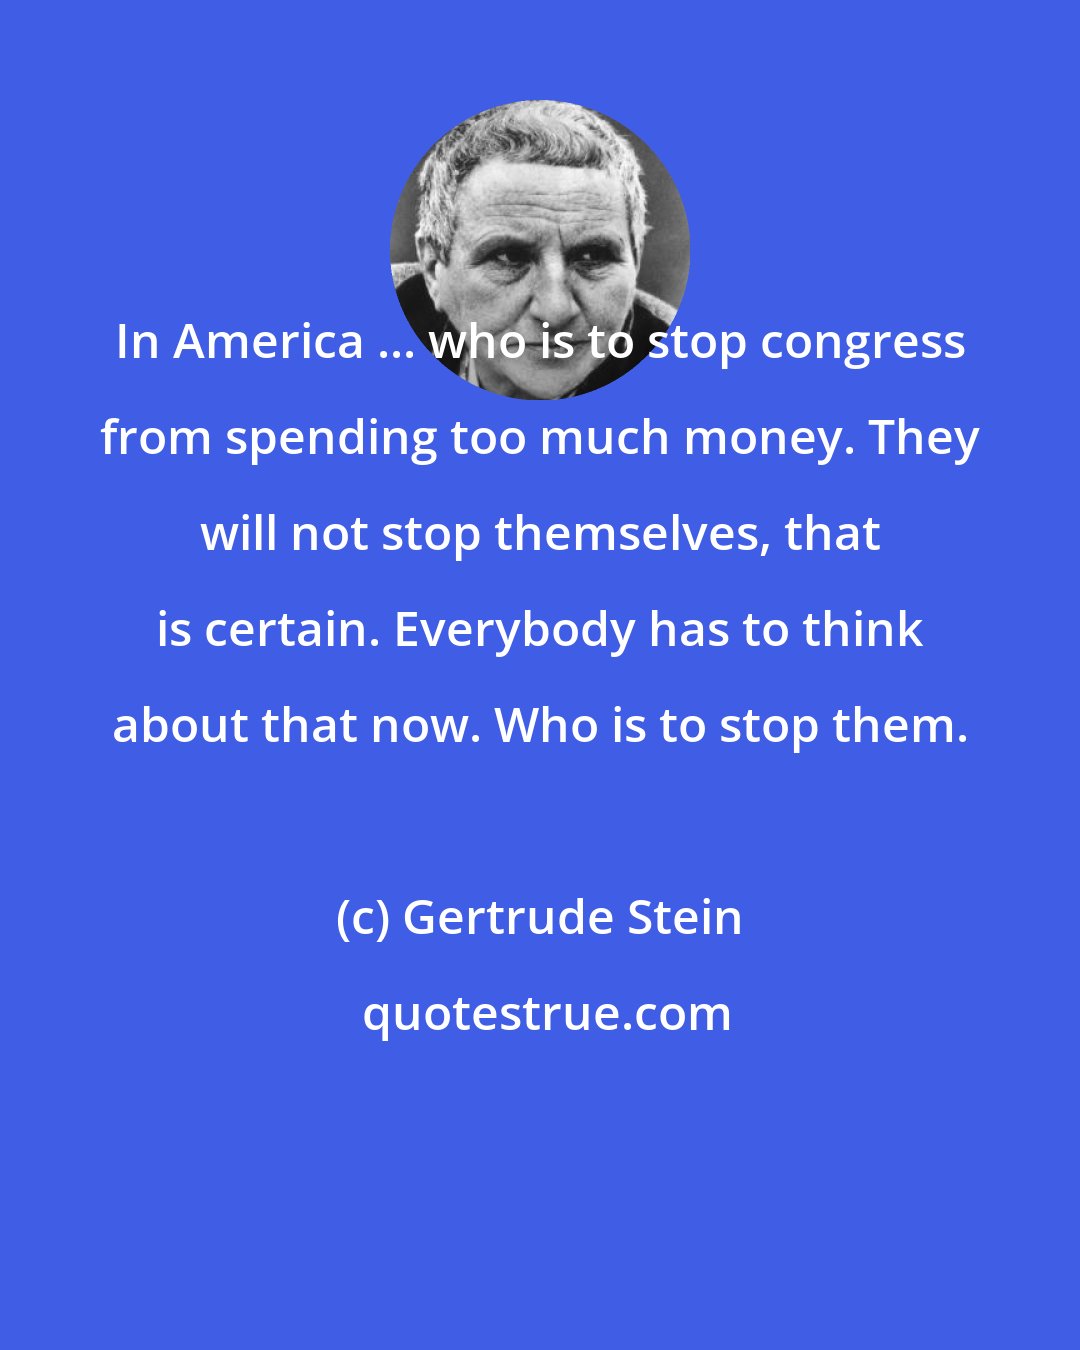 Gertrude Stein: In America ... who is to stop congress from spending too much money. They will not stop themselves, that is certain. Everybody has to think about that now. Who is to stop them.